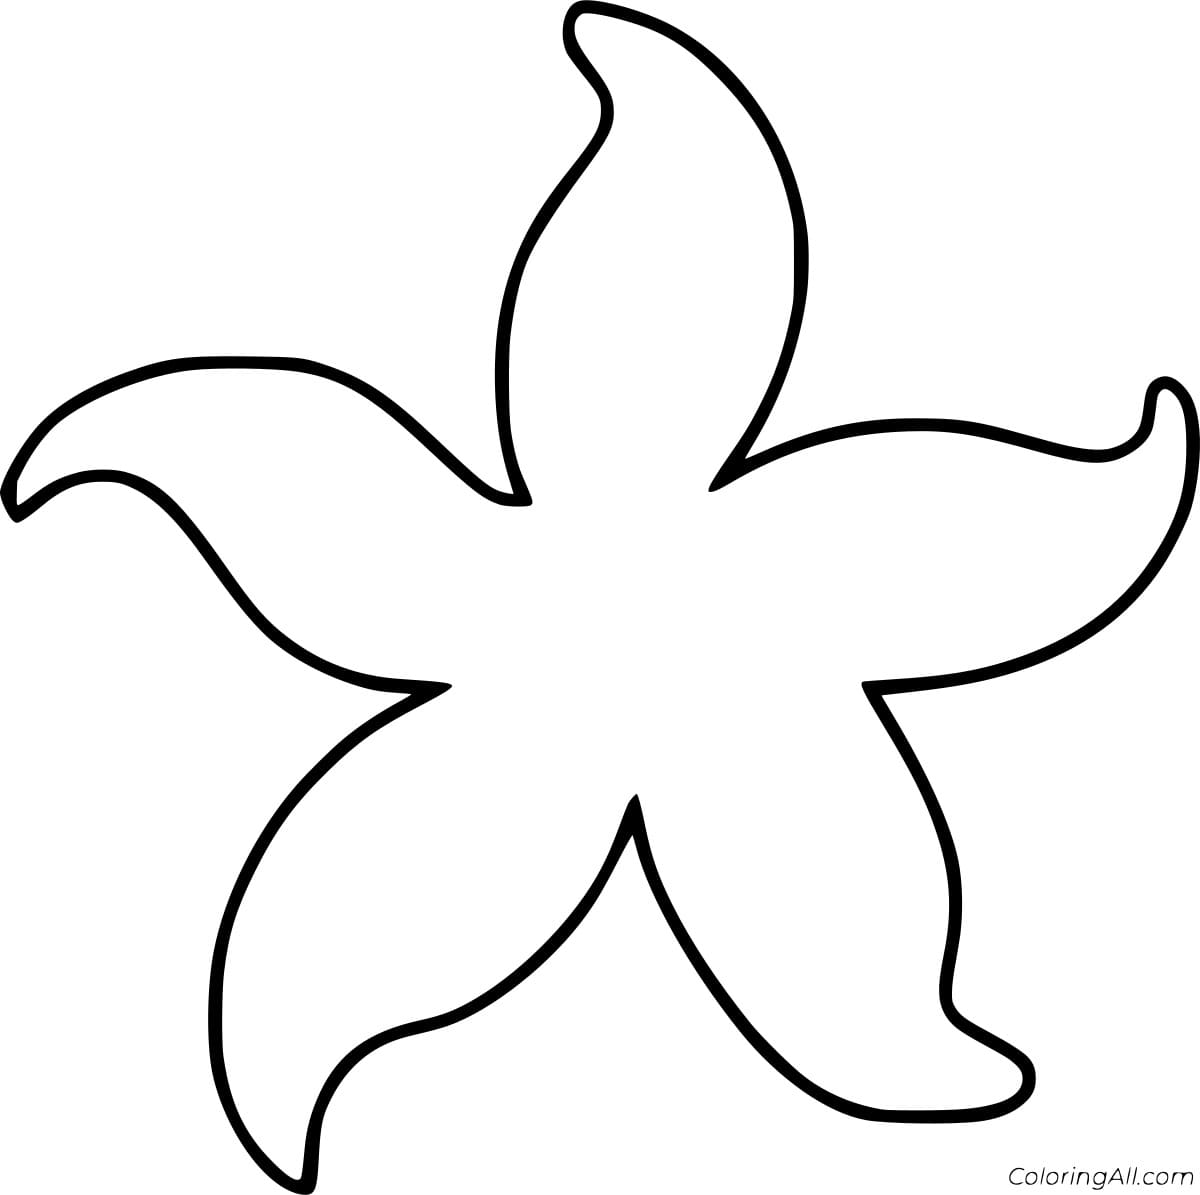 Outline Sea Star Image Coloring Page